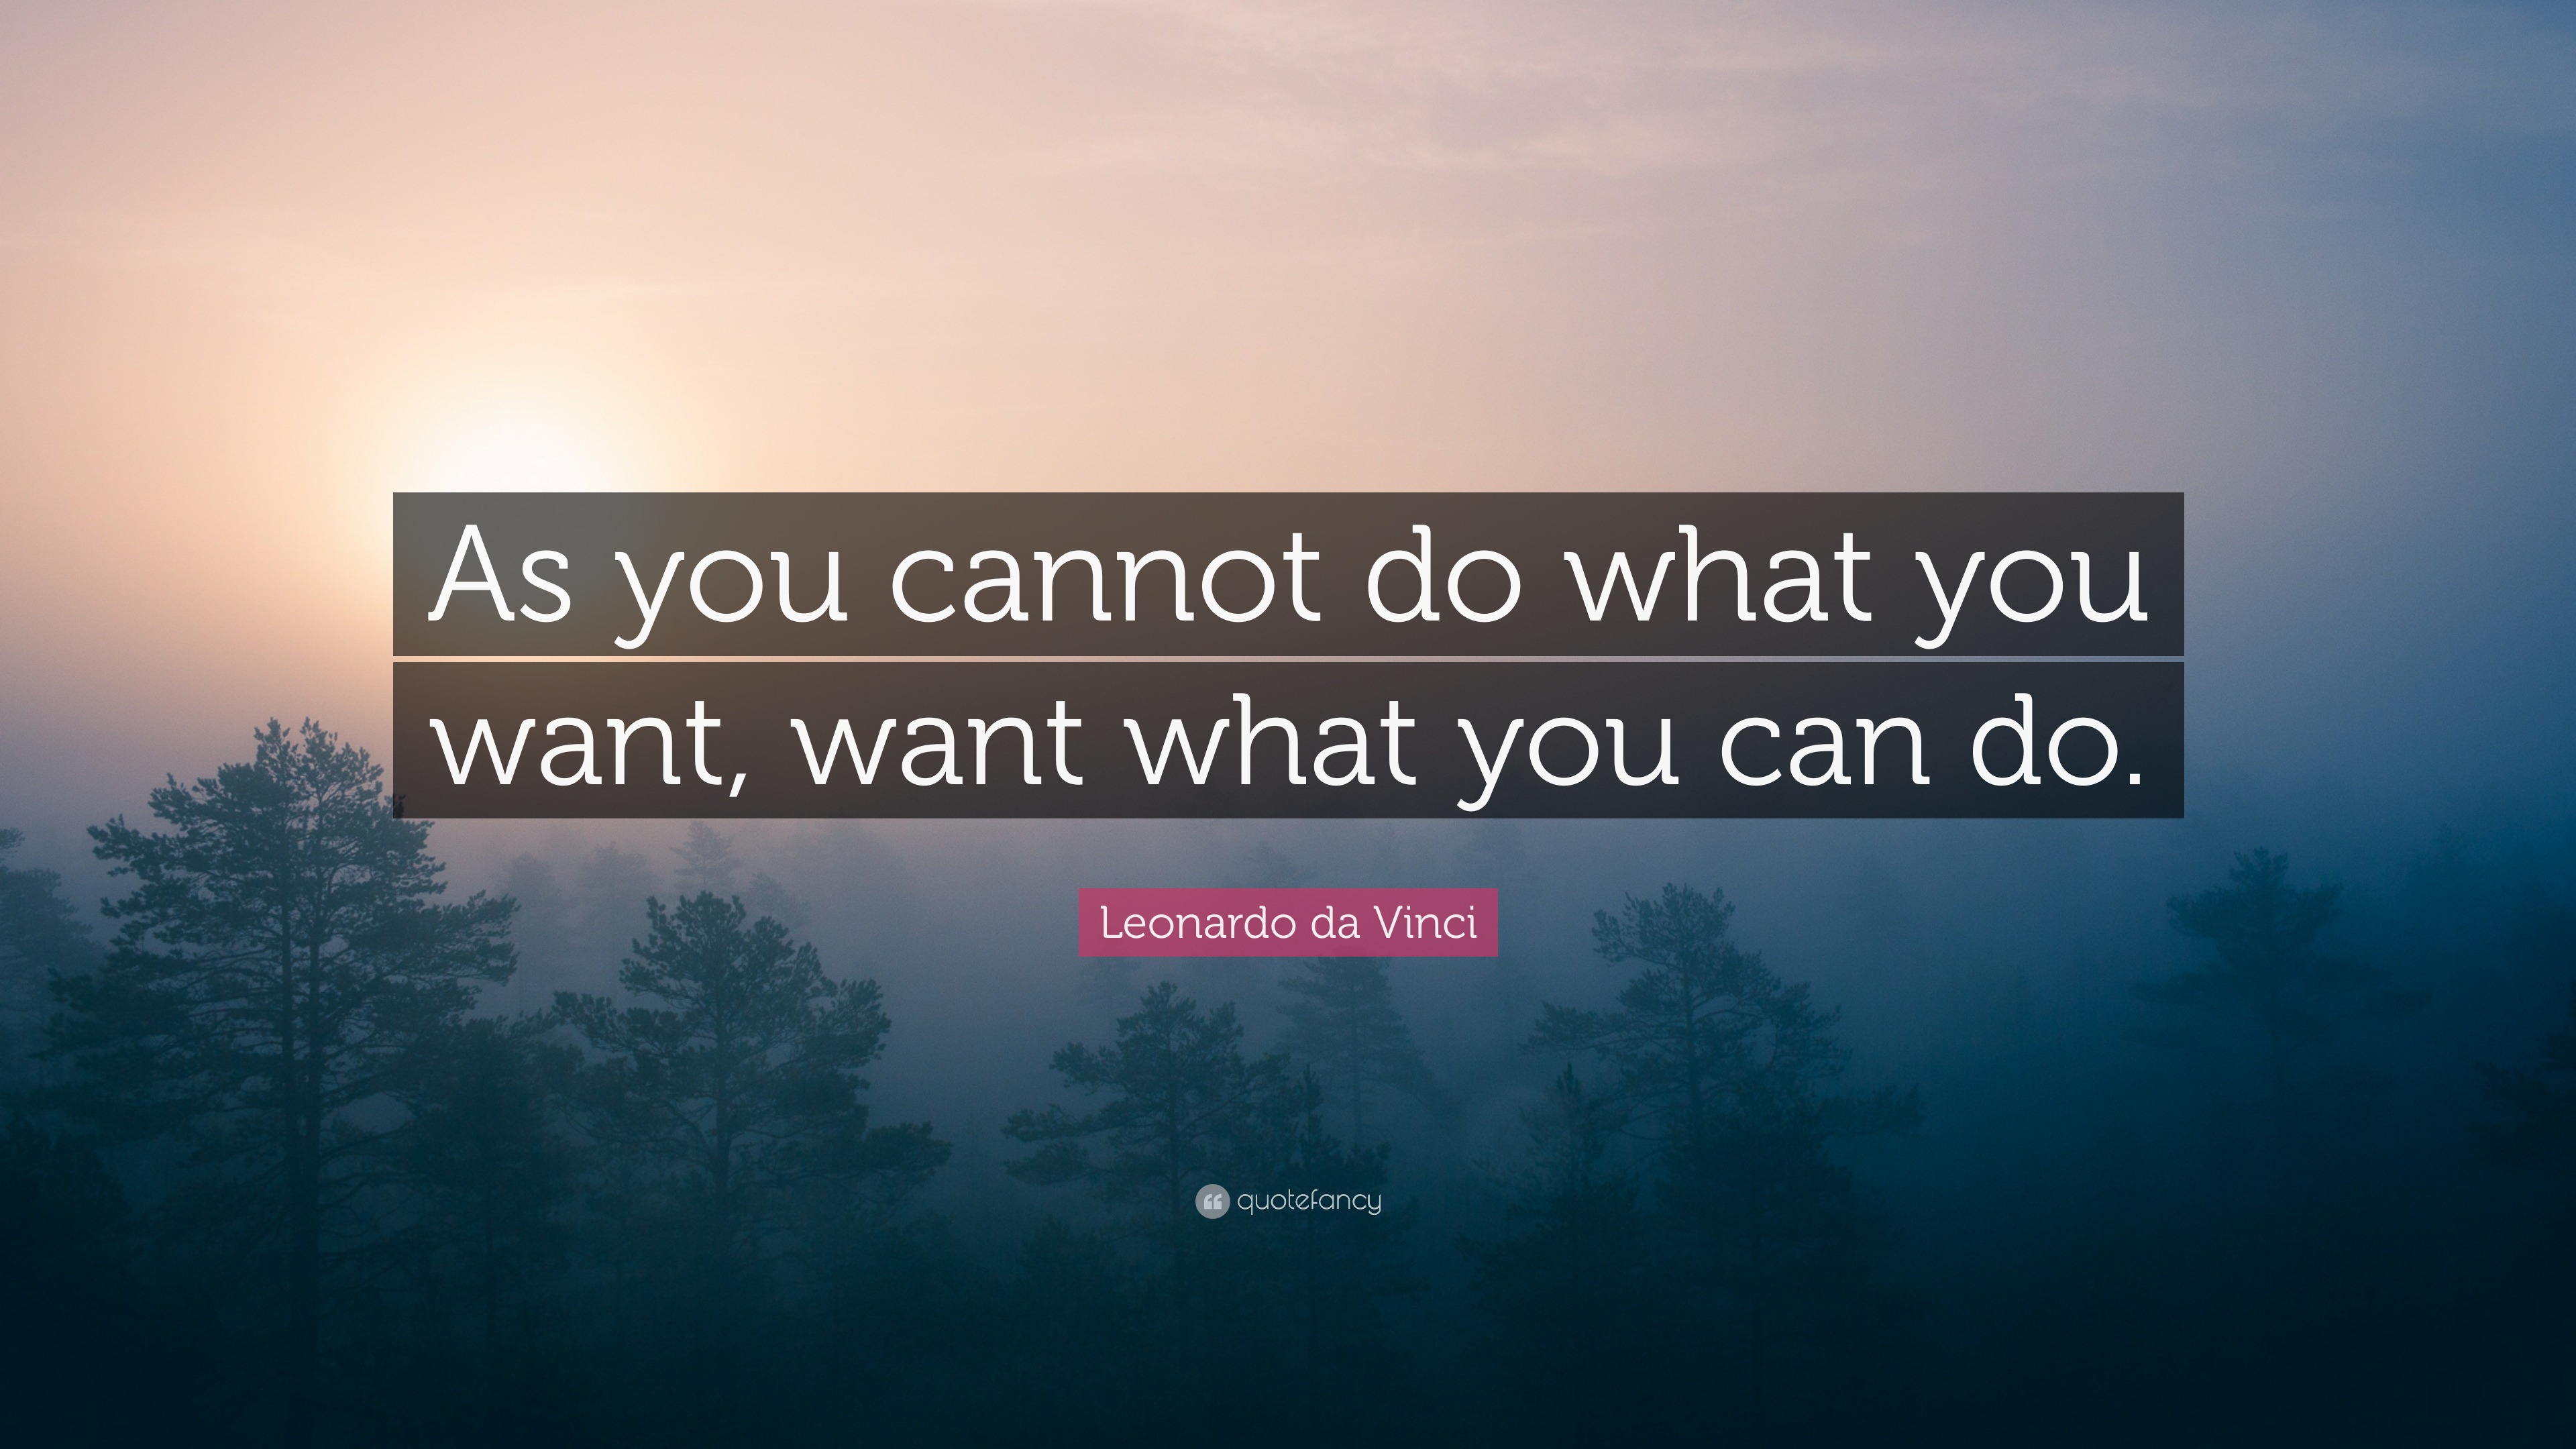 Leonardo da Vinci Quote: “As you cannot do what you want, want what you ...